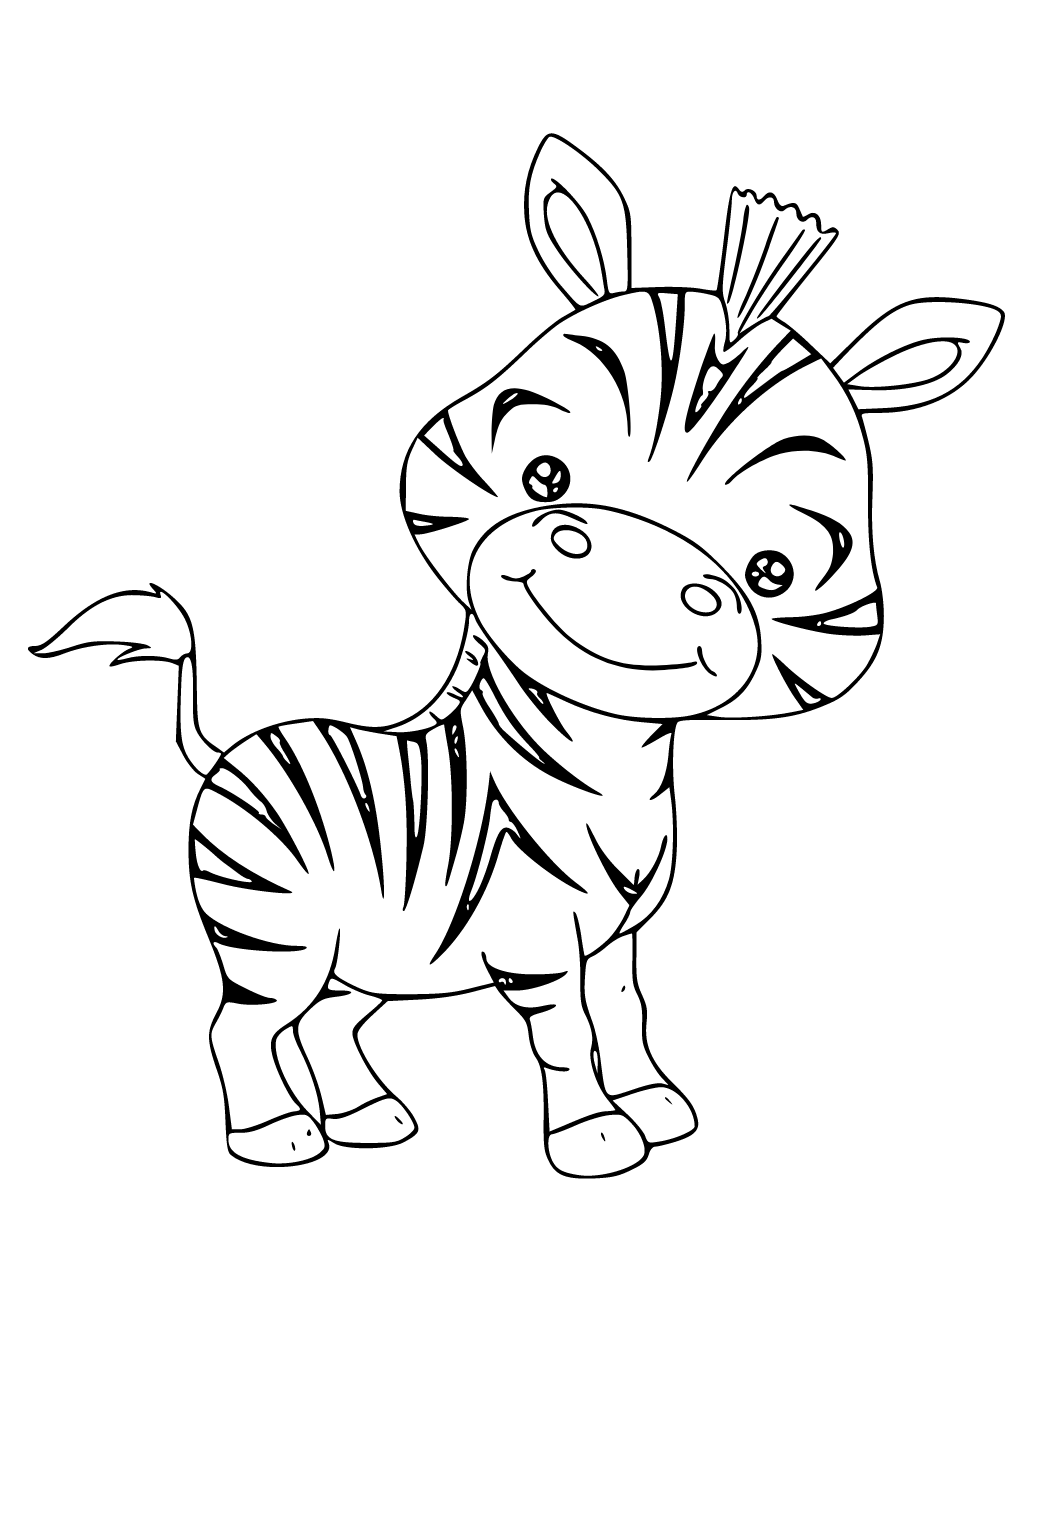 Free printable zebra baby coloring page for adults and kids